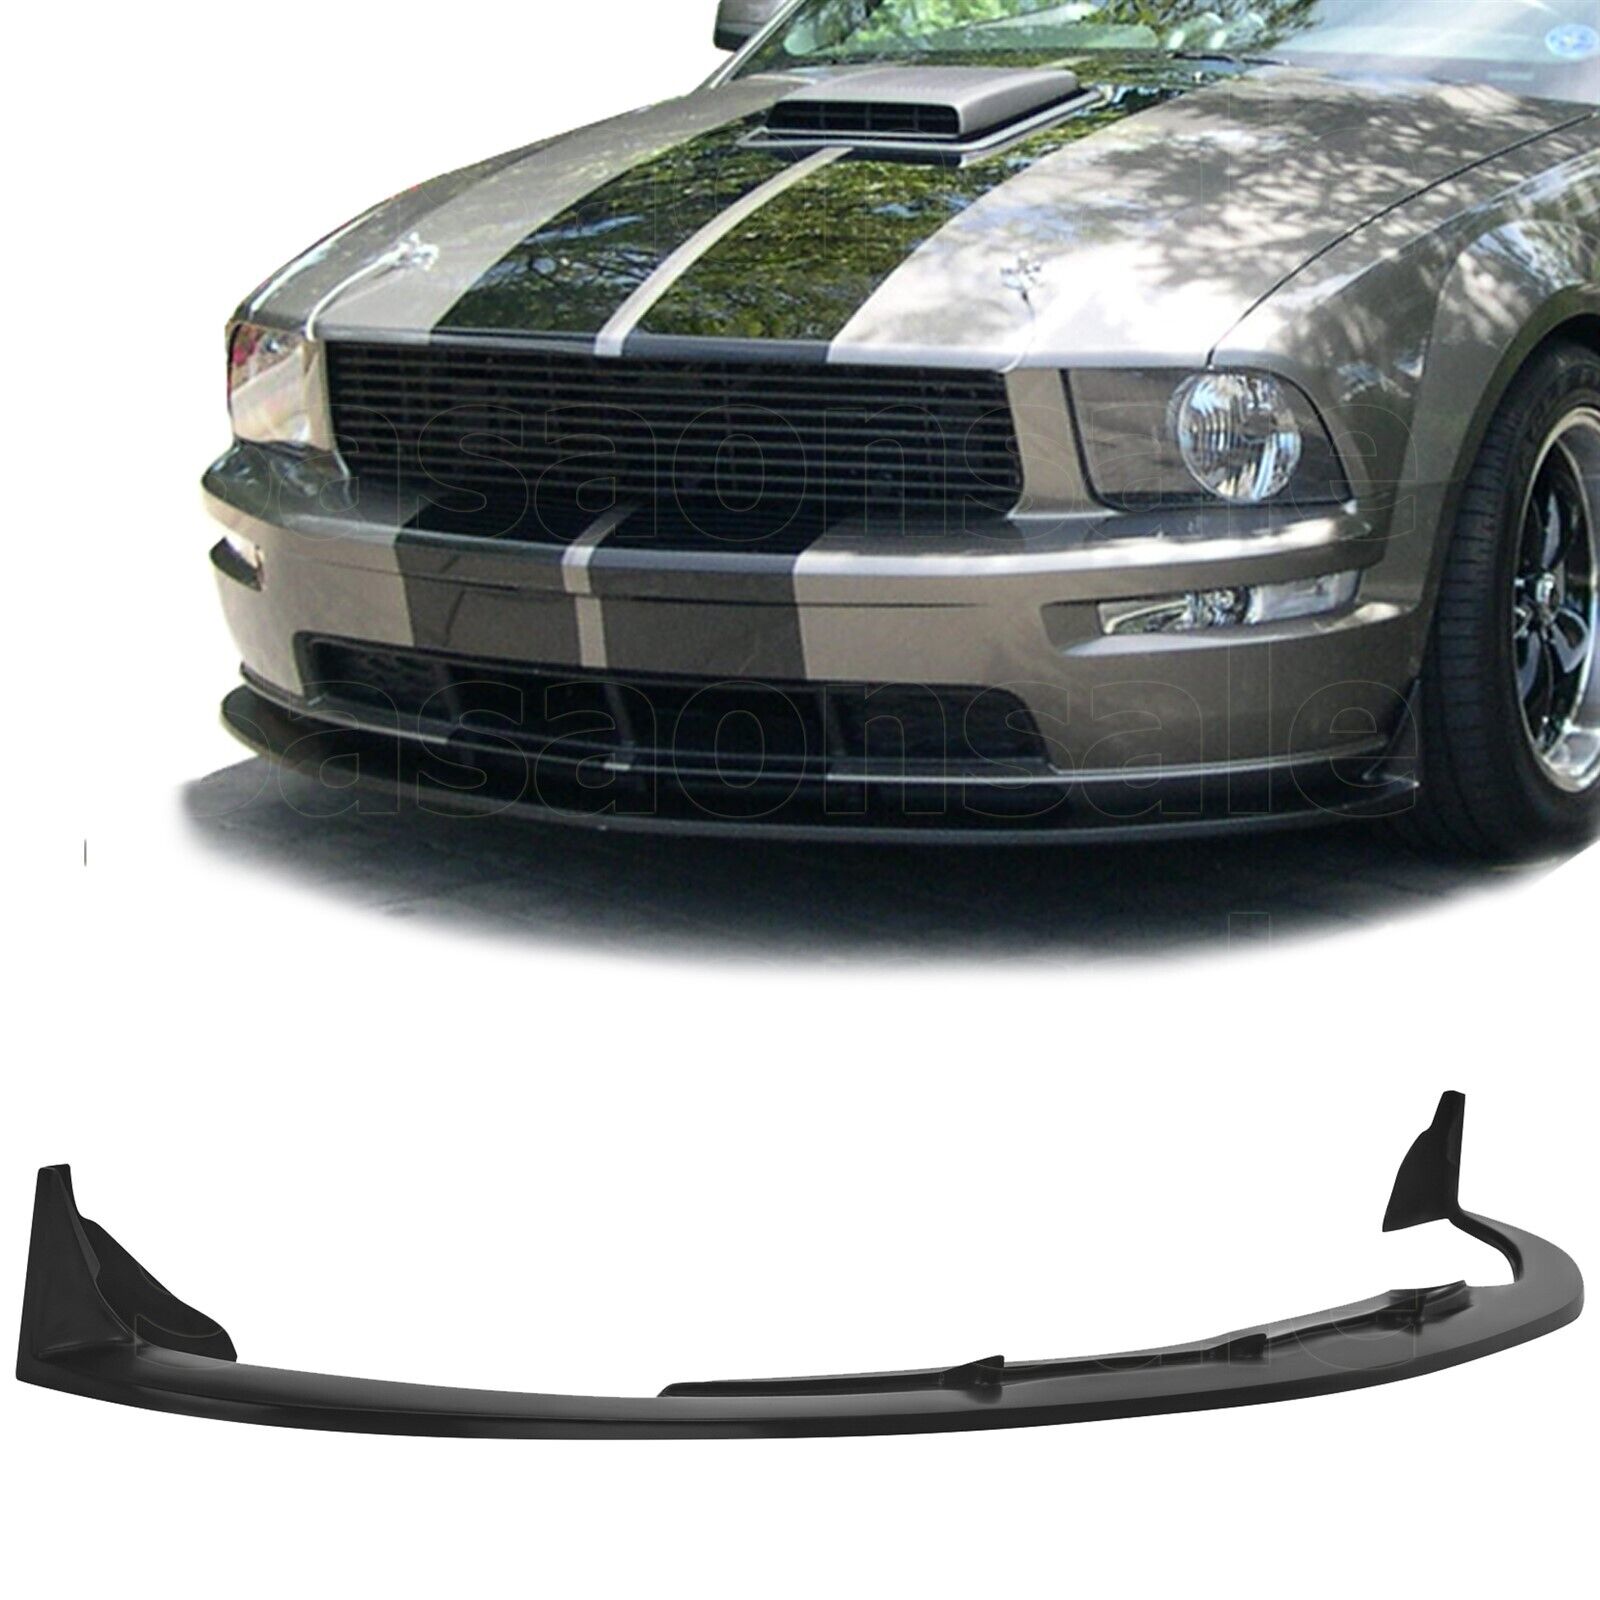 [SASA] Made for 2005-2009 Ford Mustang GT Only CV3 PU Front Bumper Lip Spoiler